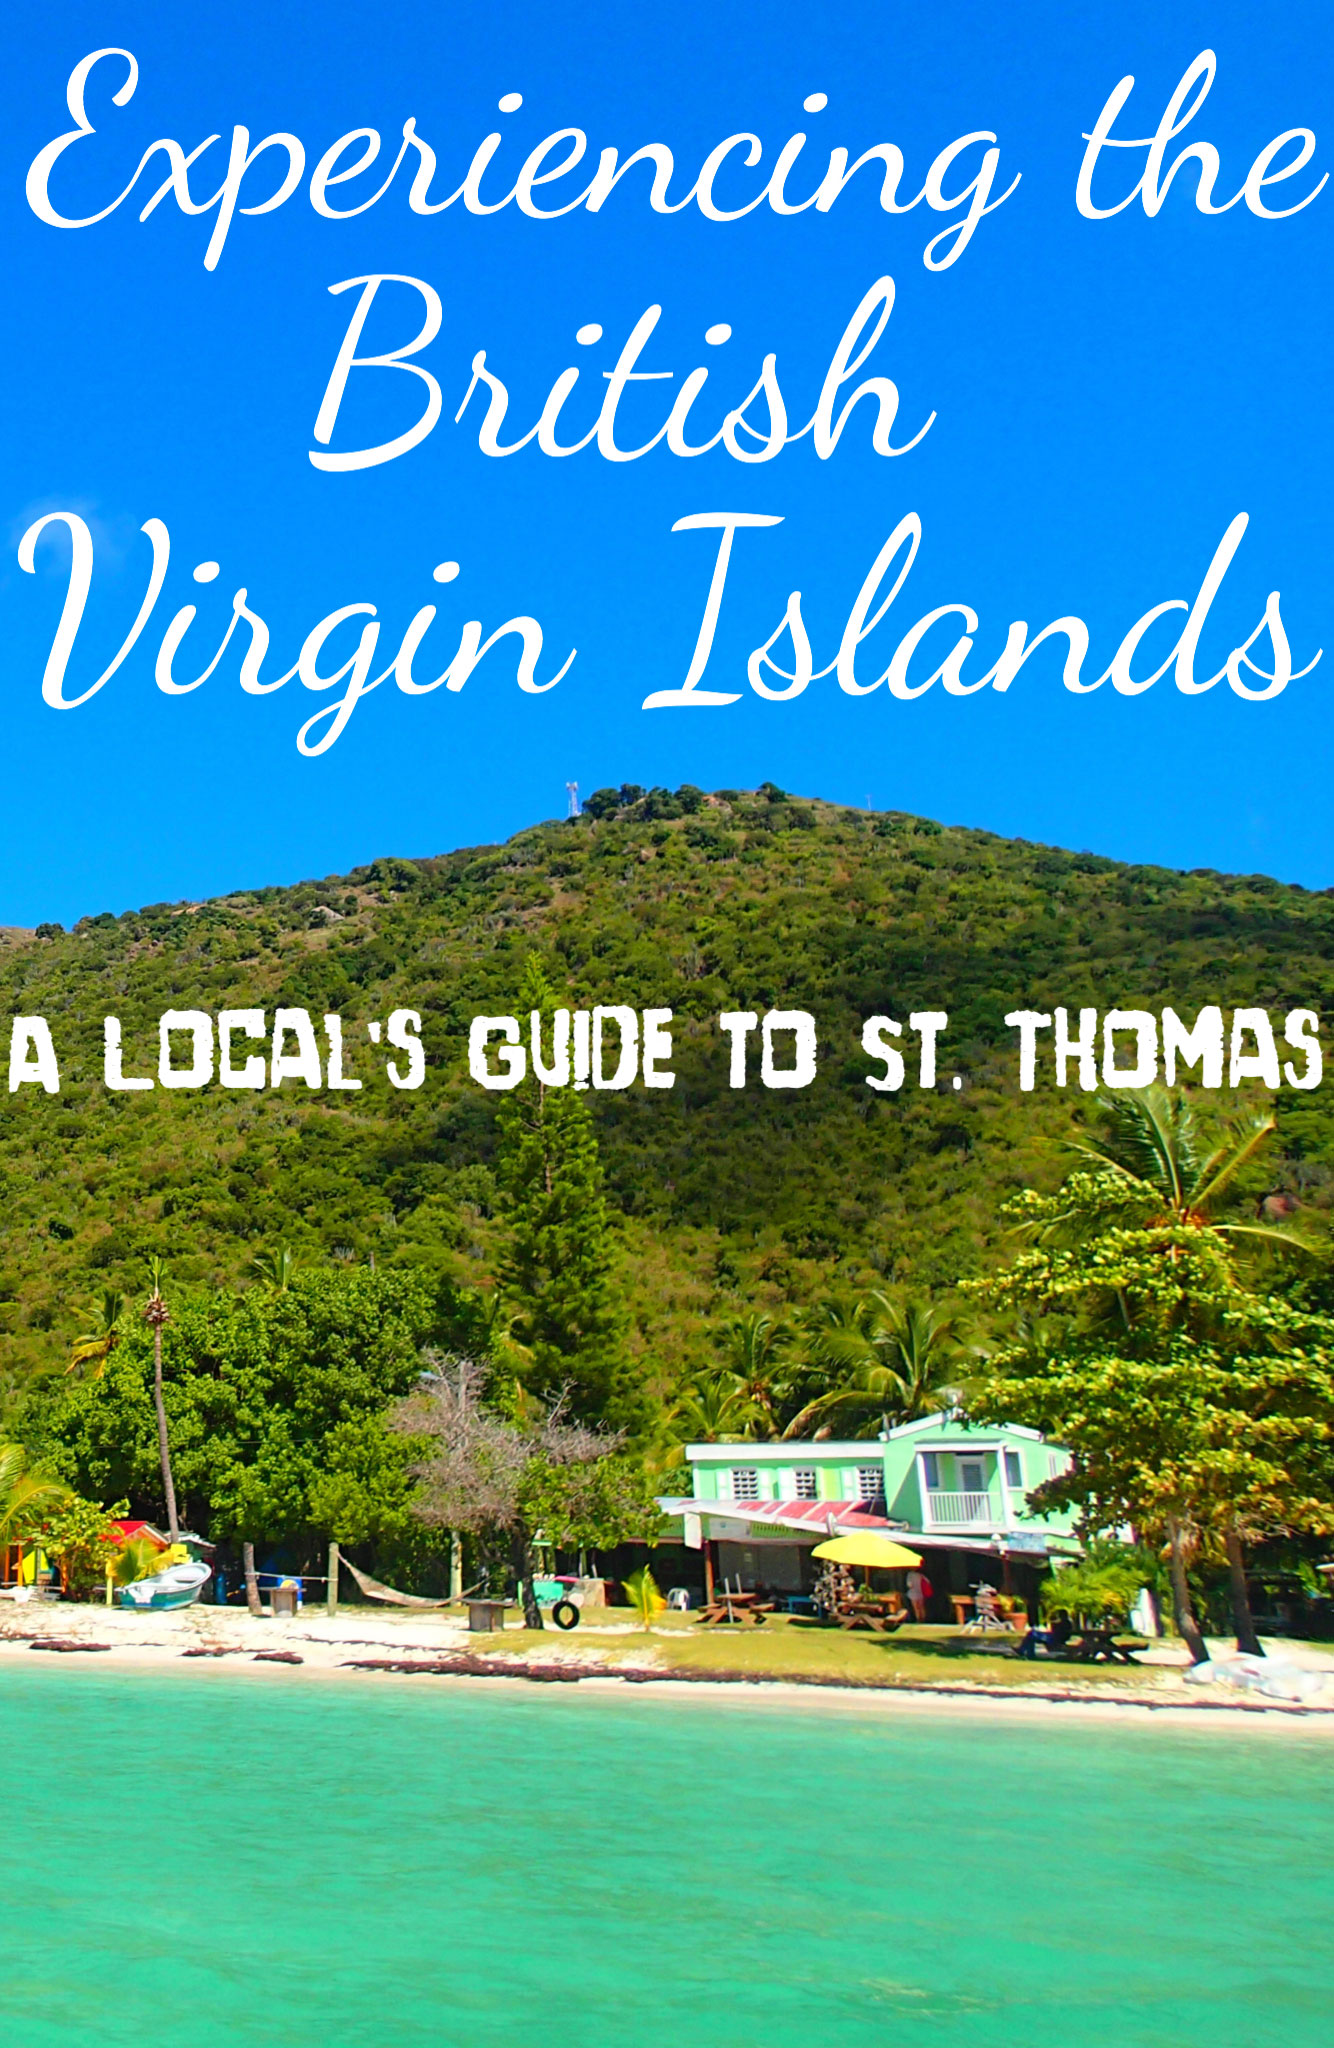 A Local's Guide to St. Thomas: Experiencing the British Virgin Islands